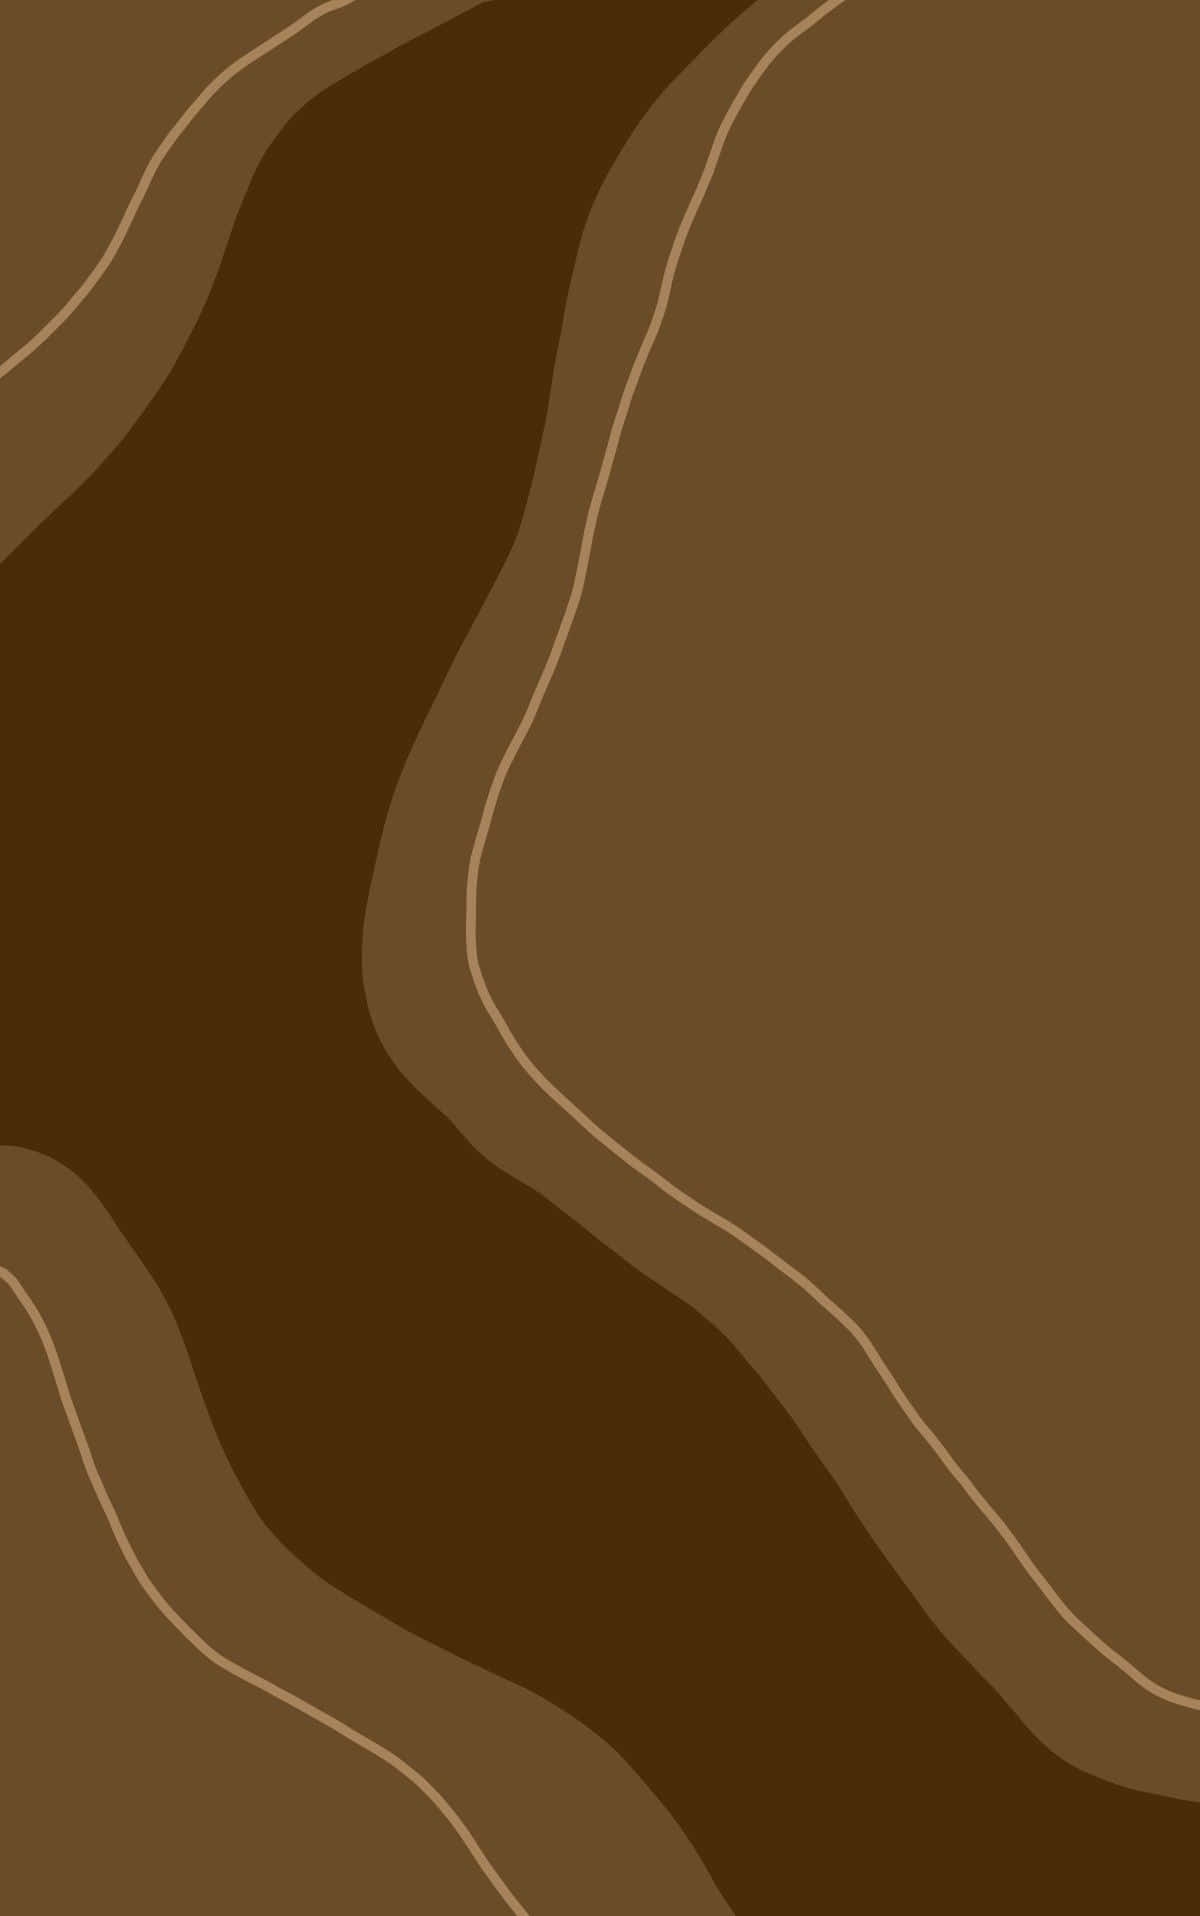 A Brown And White River With A Brown Background Wallpaper